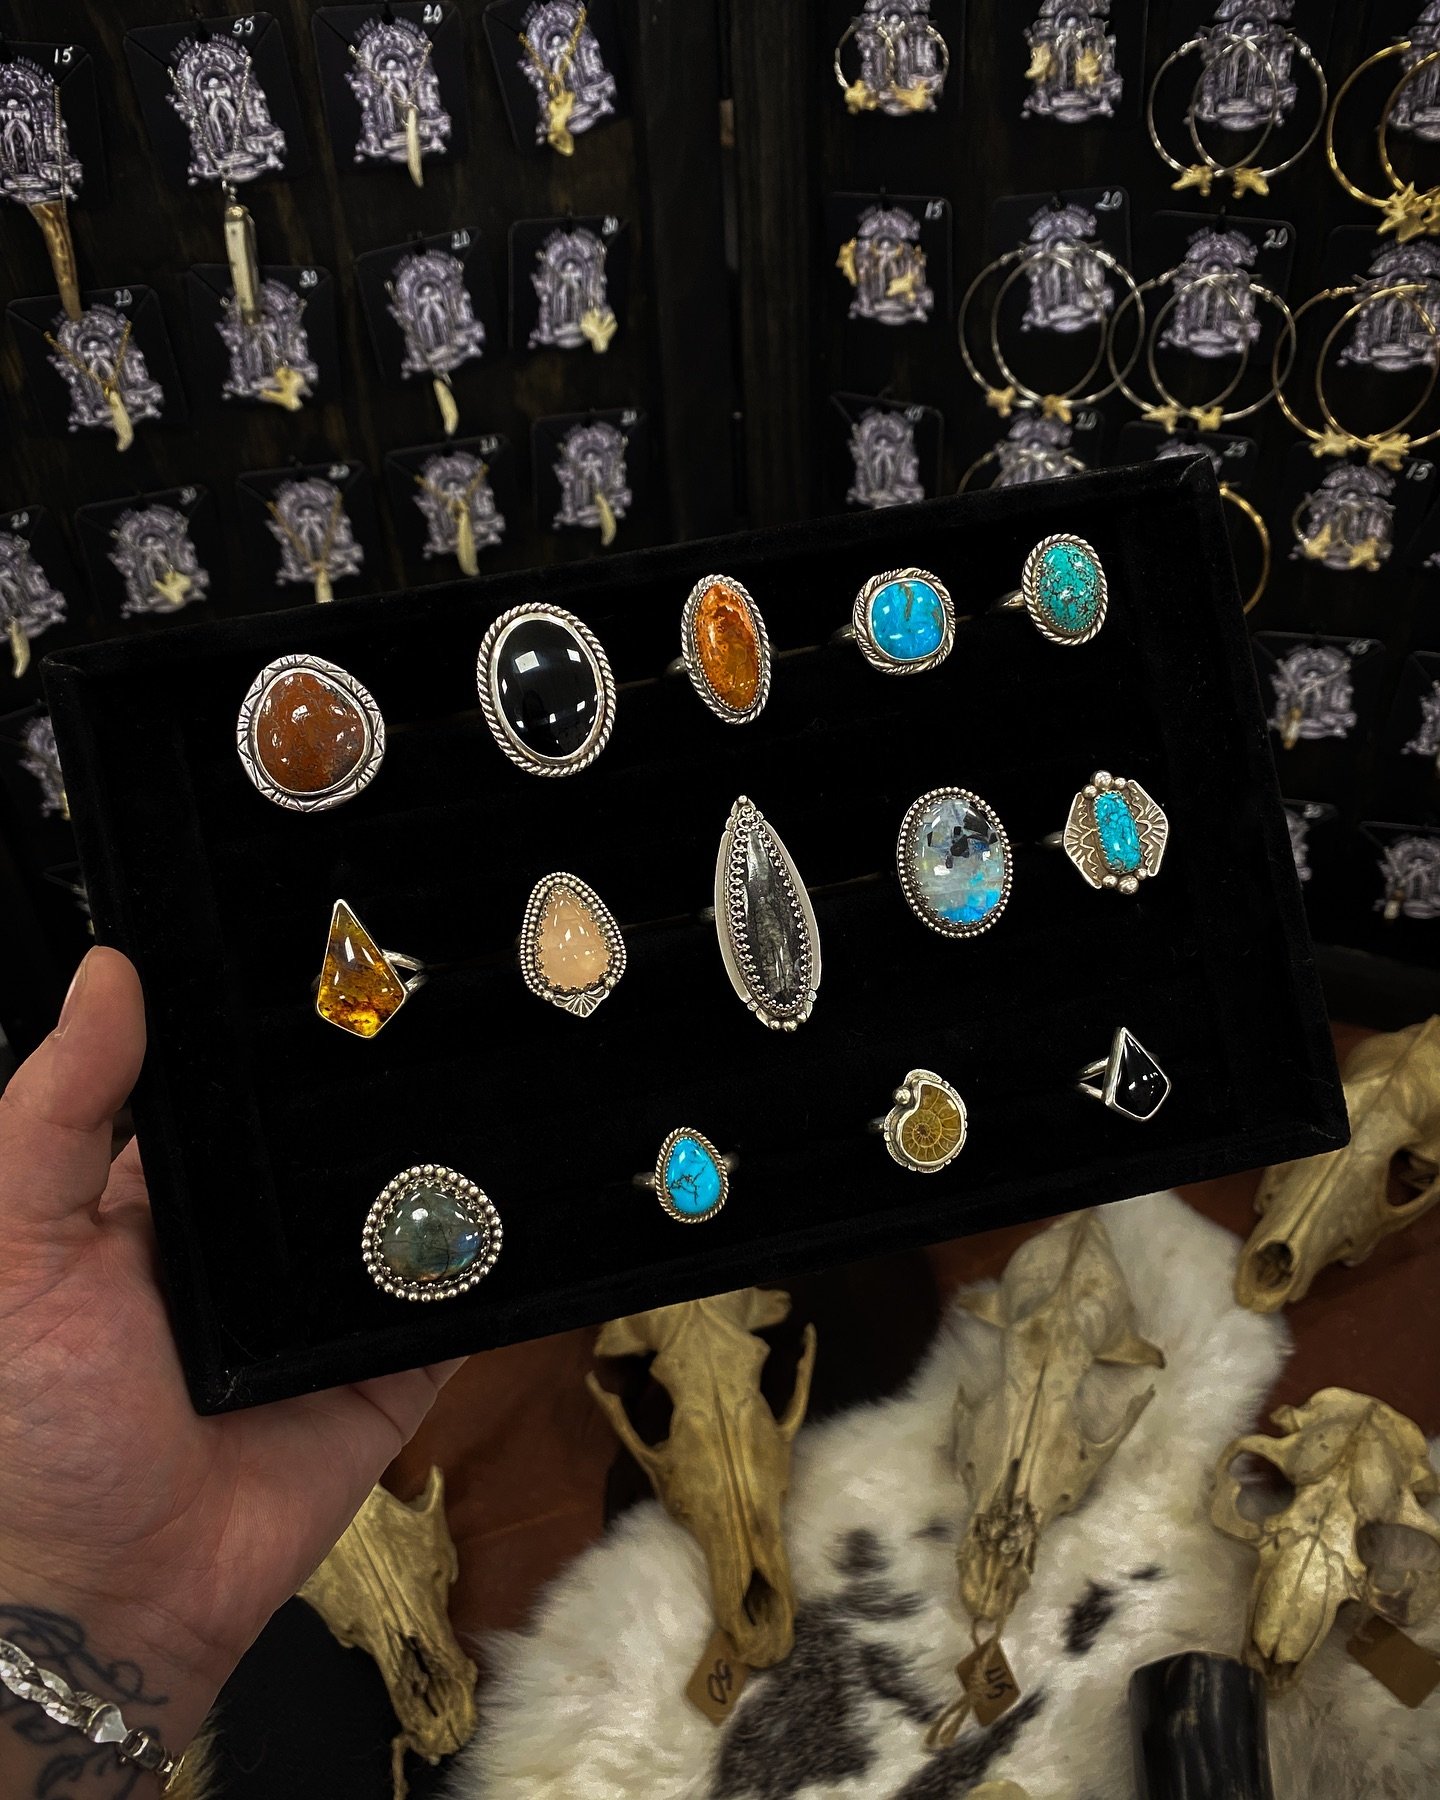 We&rsquo;re all set up at the @se_punk_flea_market in Charleston for the weekend! Come say hi and try on some rings!! 🖤
.
.
.
.
.
.
.
.
.
.
.
.
.
#handmadejewelry #handcraftedjewelry #sterlingsilverjewelry #silverrings #silversmith #silversmithig #c